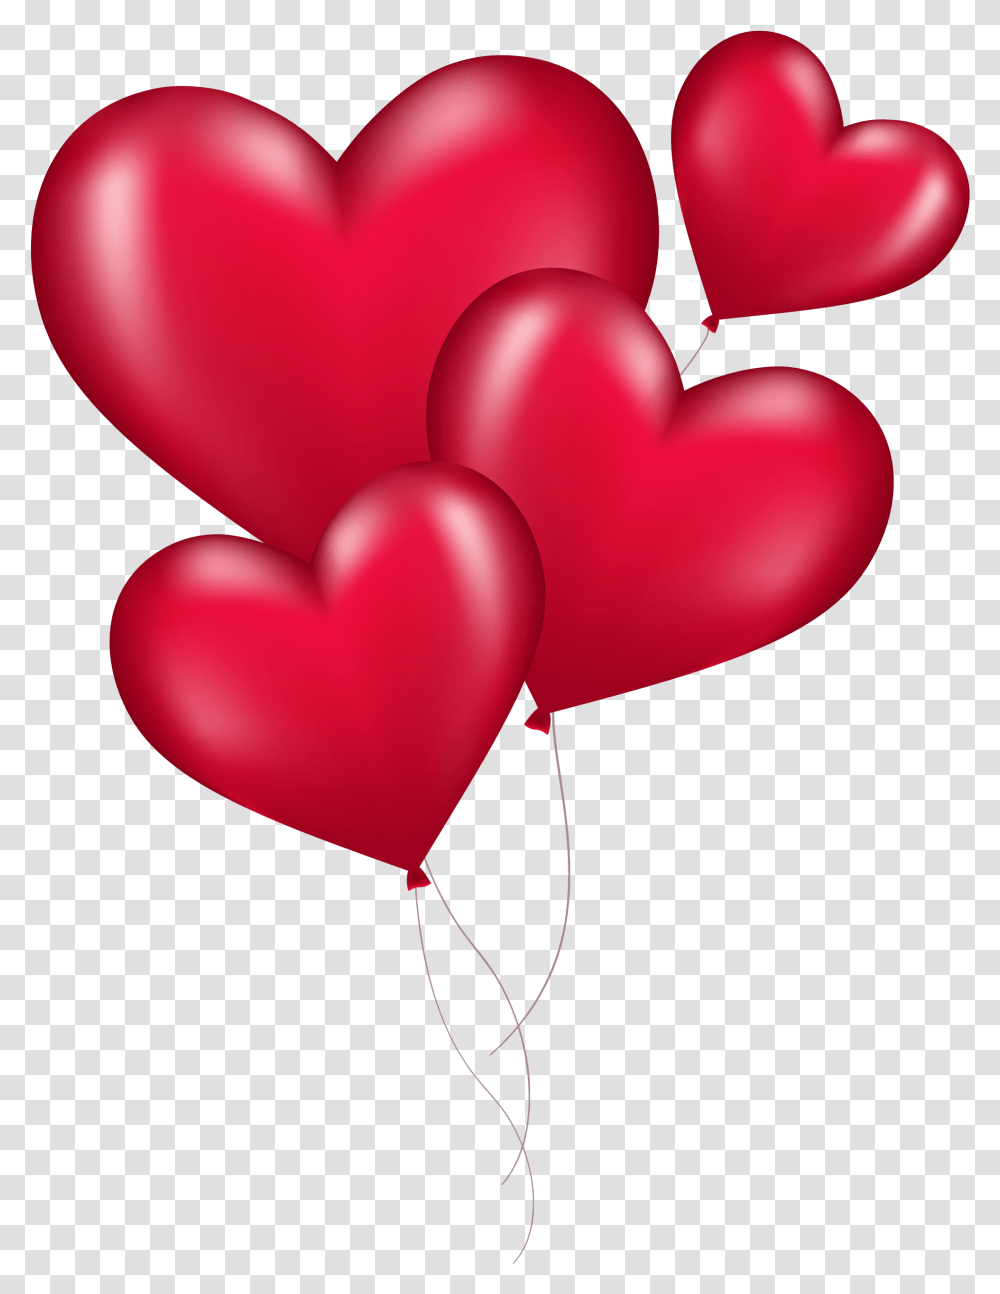 Images Pngs Love Heart Love Heart Balloons,  Transparent Png